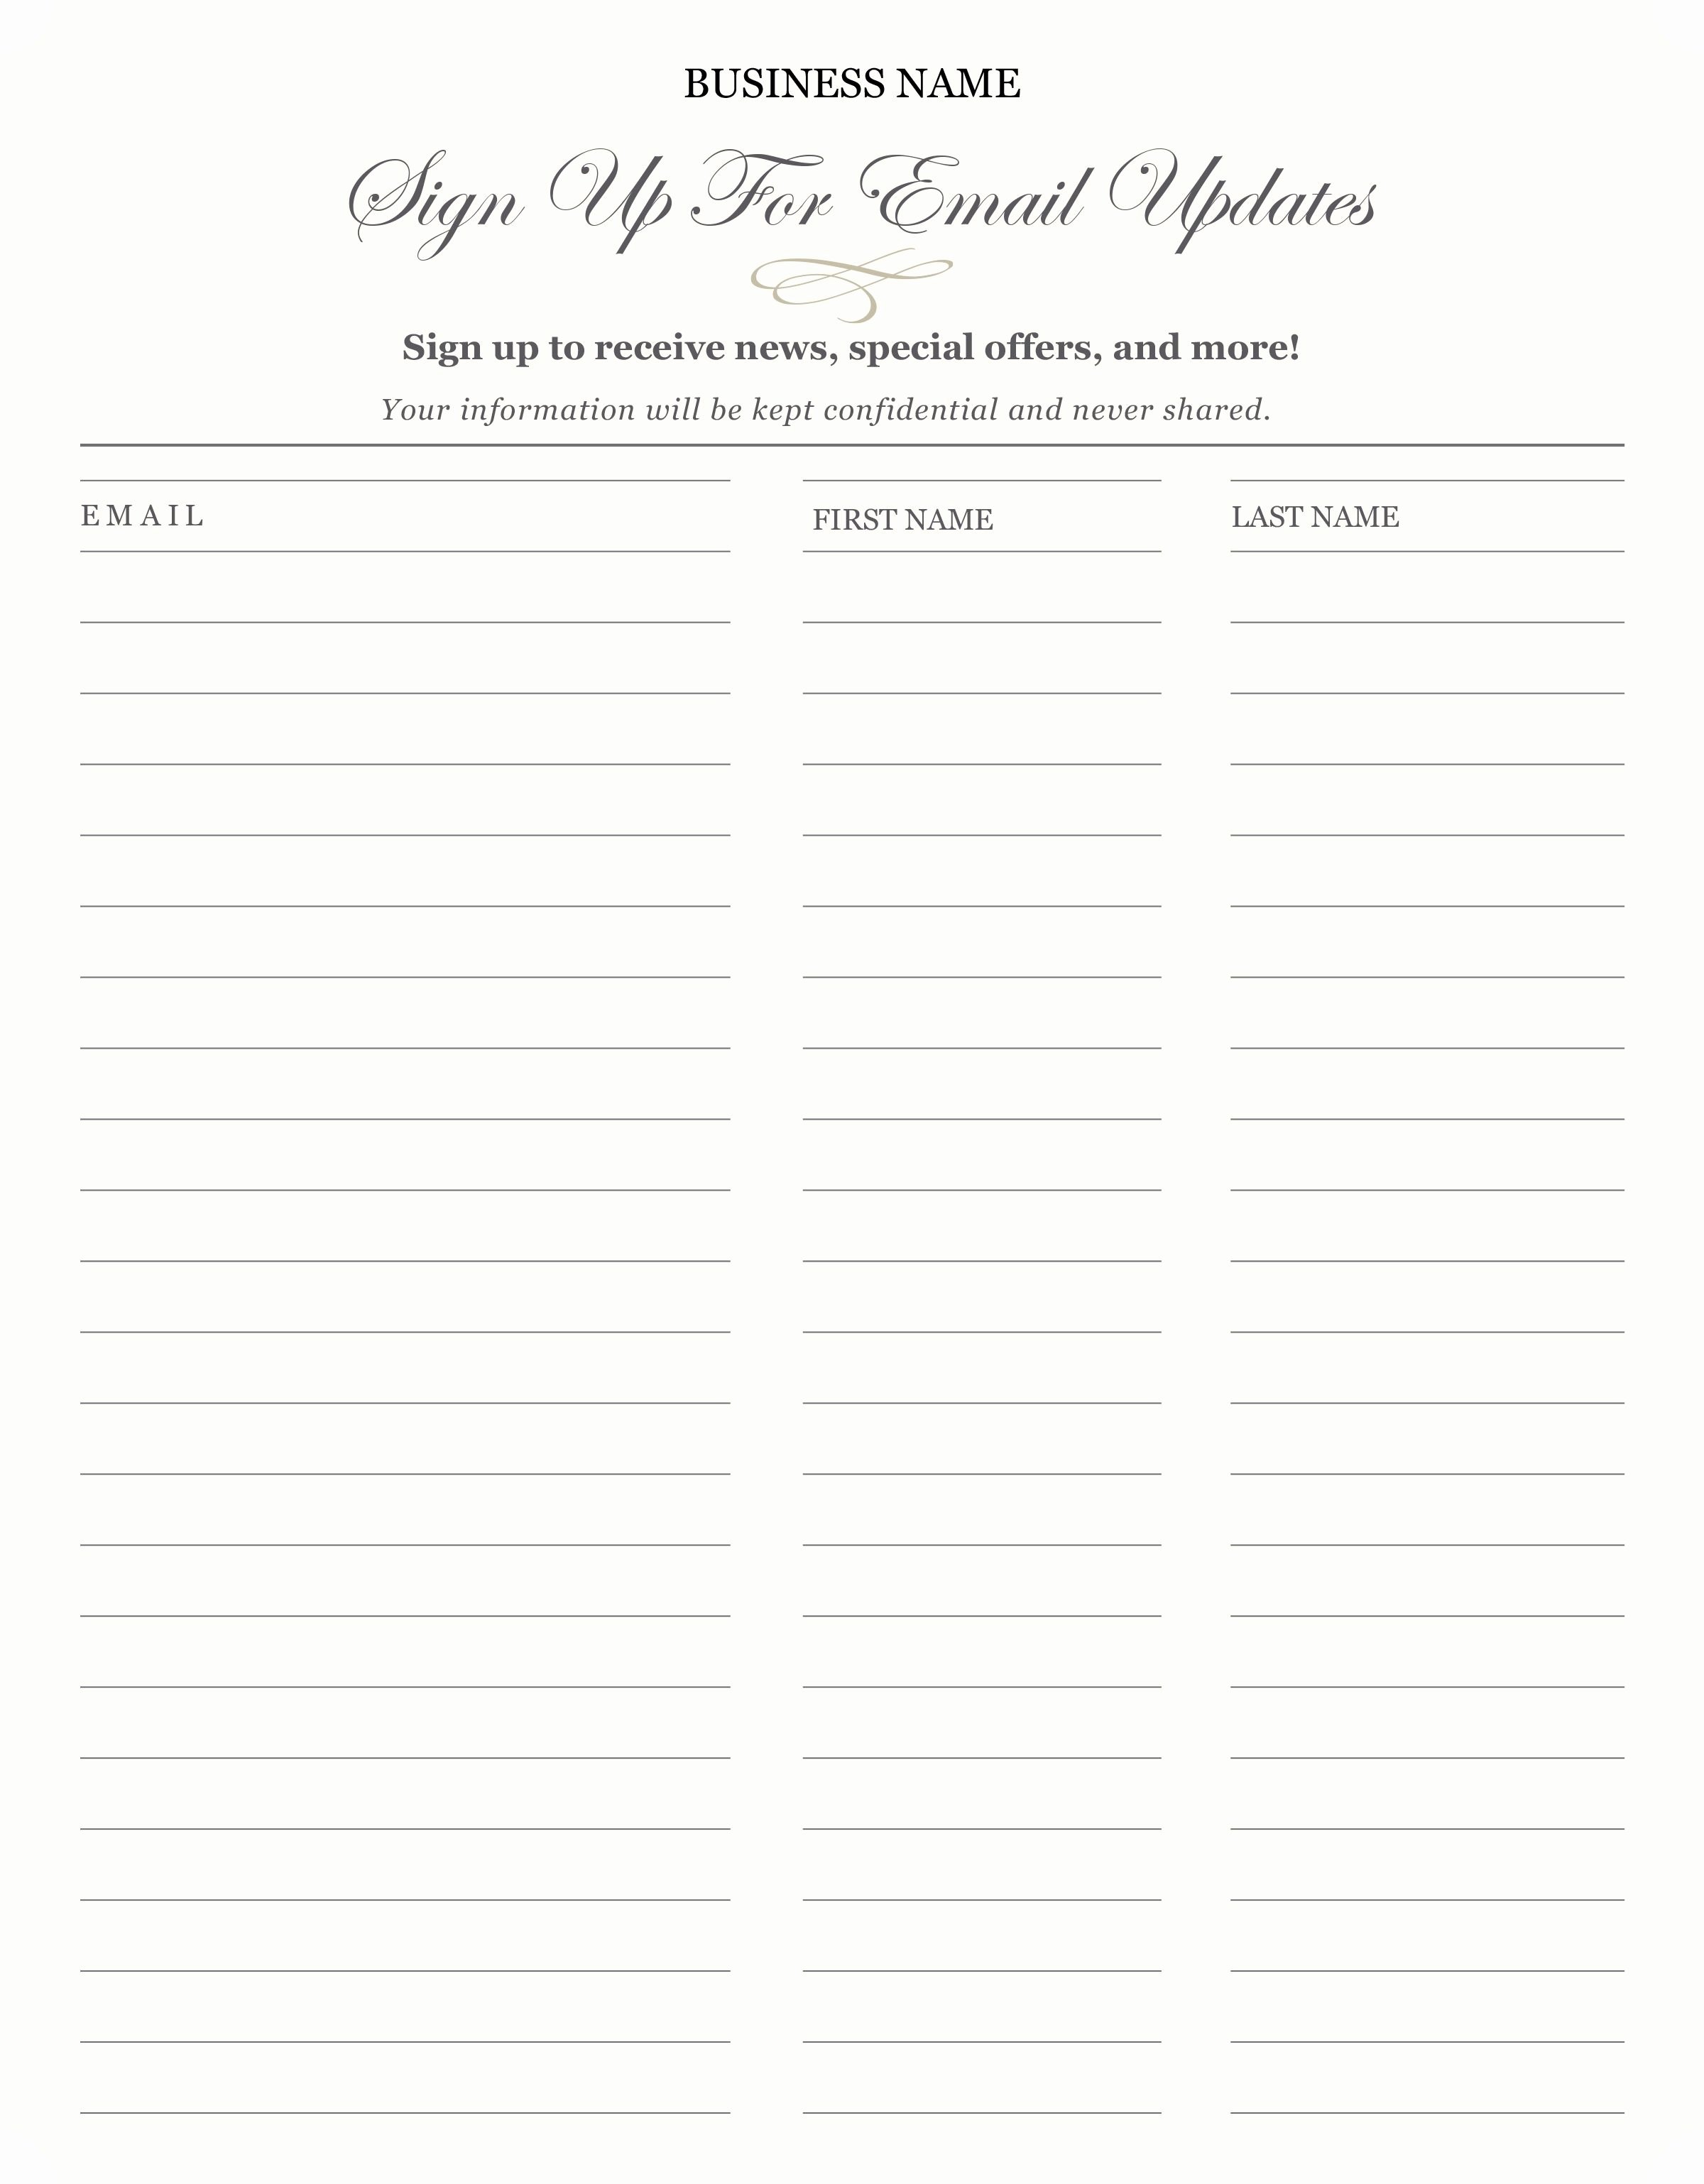 Email Sign Up form Template Beautiful Pin by Constant Contact On Email Marketing Tips and Best